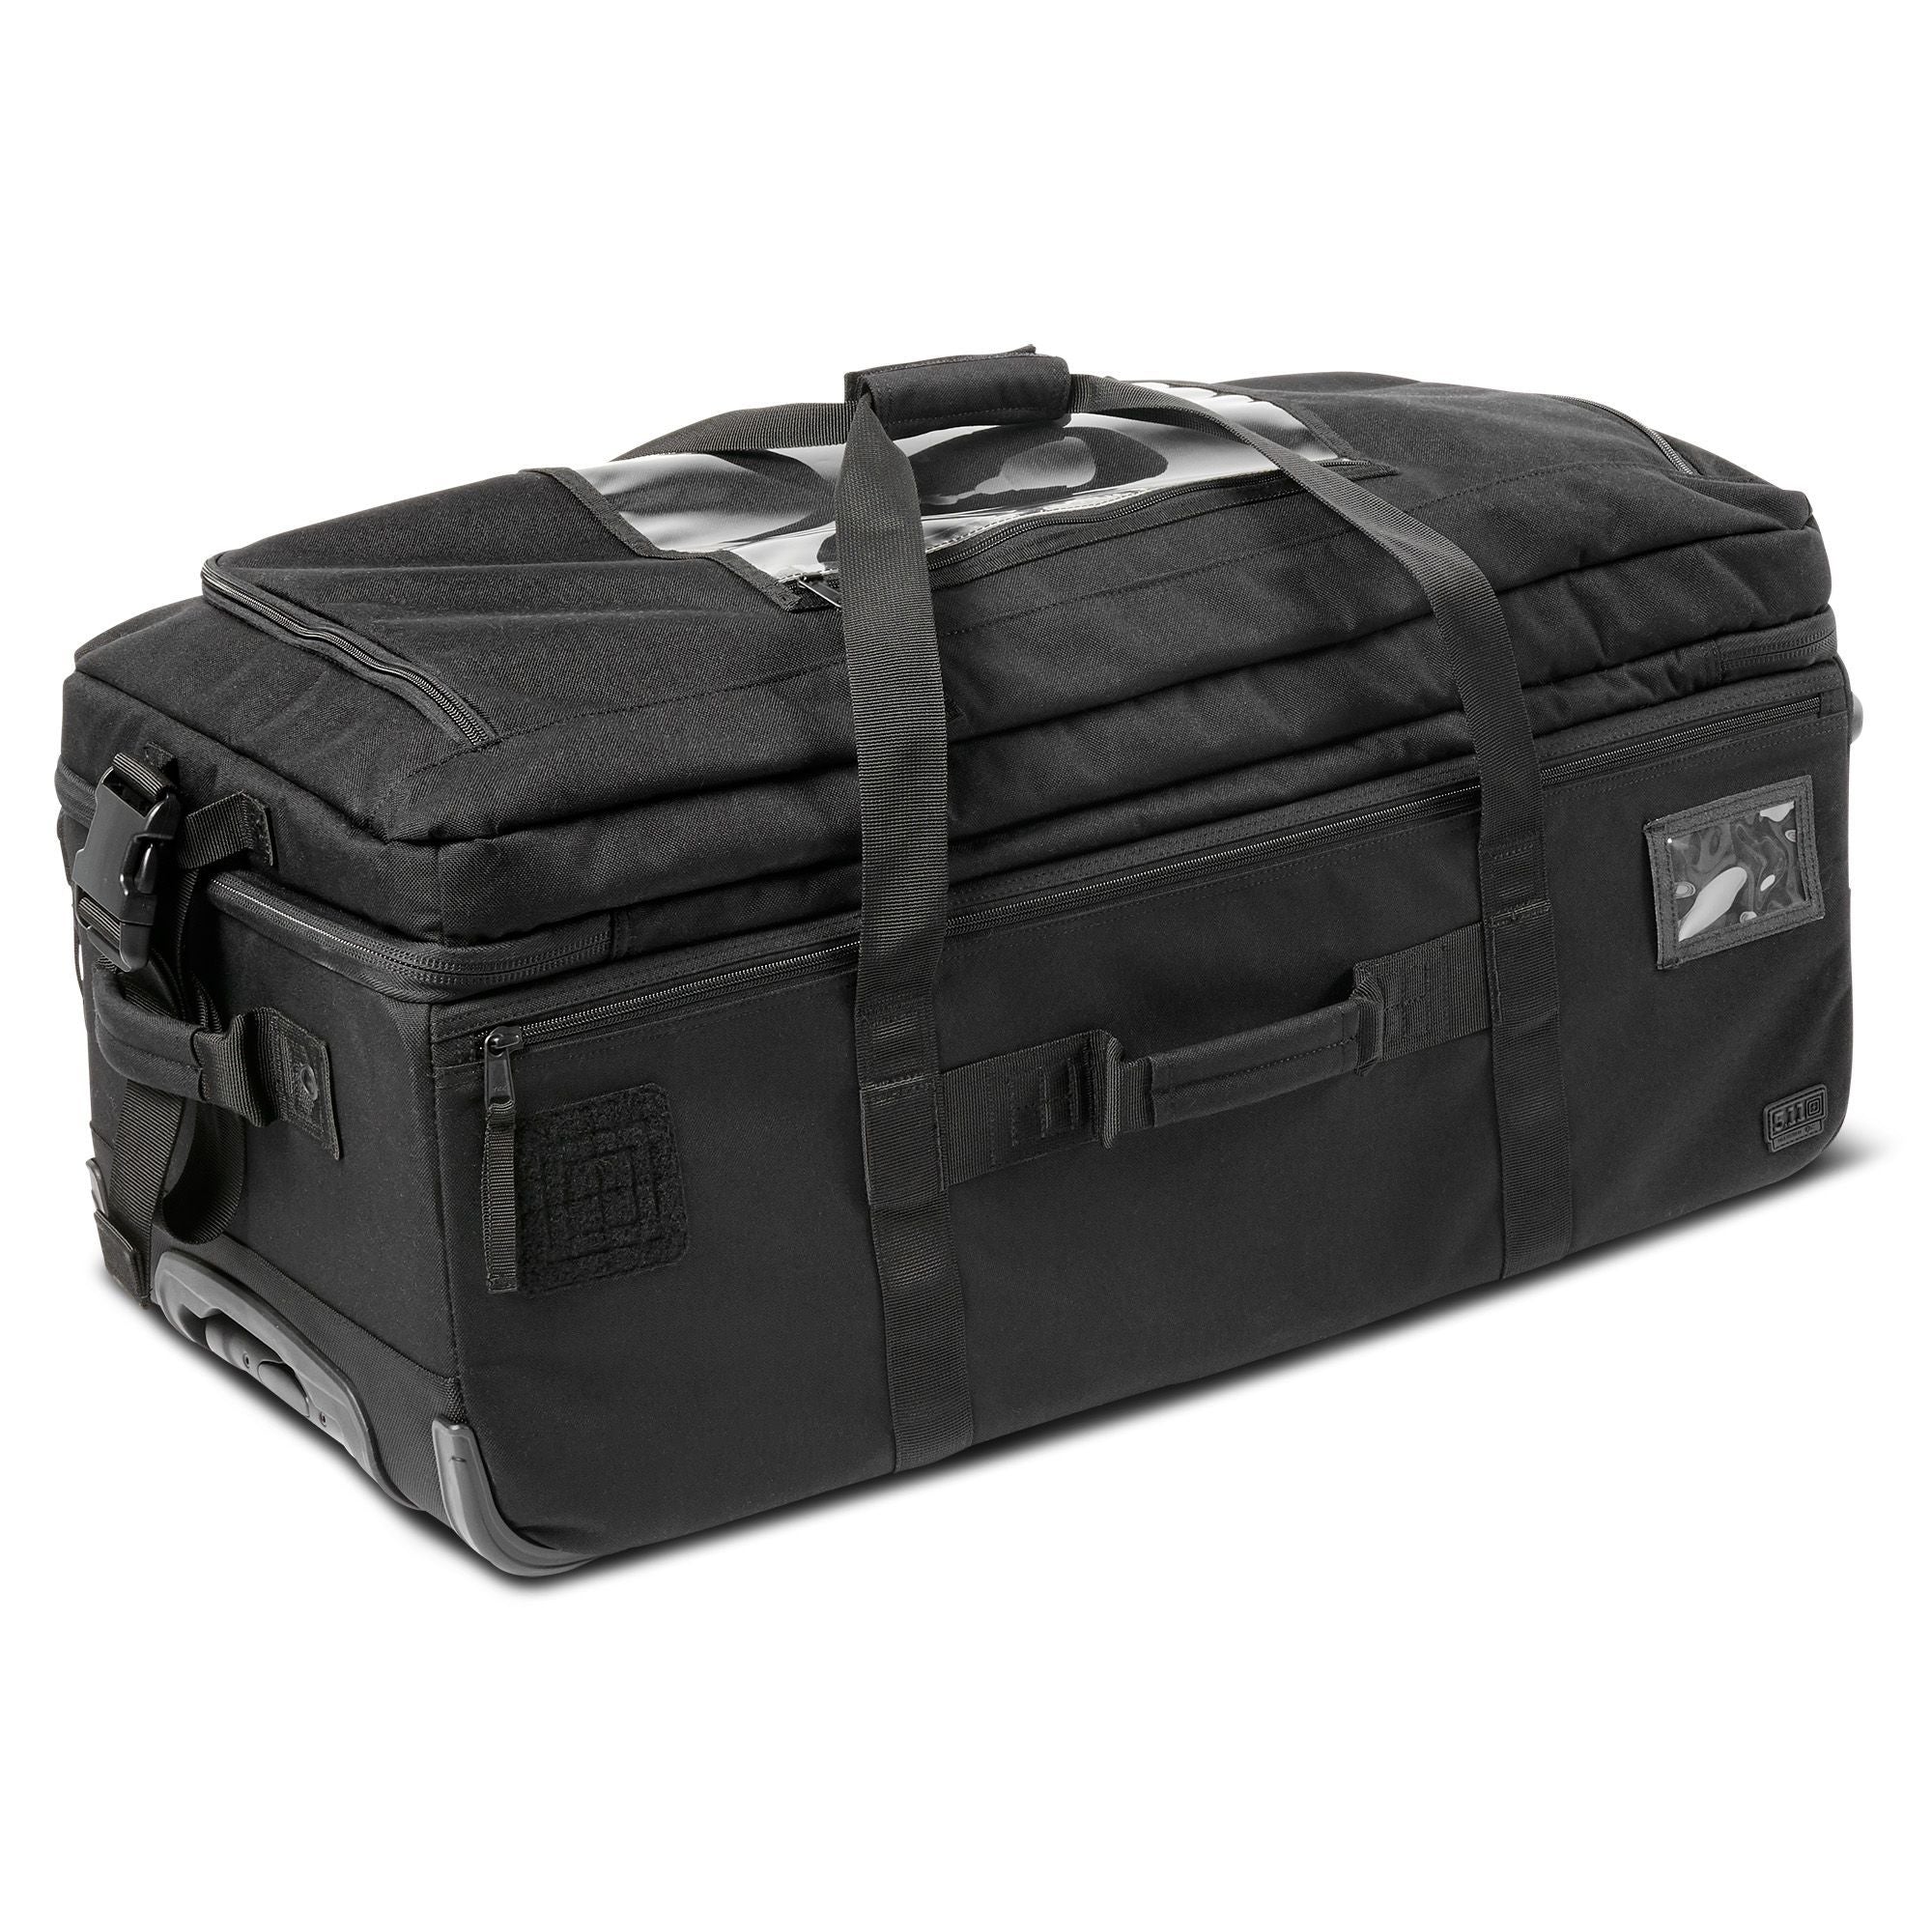 5.11 Tactical Mission Ready 3.0 Bag Bags, Packs and Cases 5.11 Tactical Tactical Gear Supplier Tactical Distributors Australia